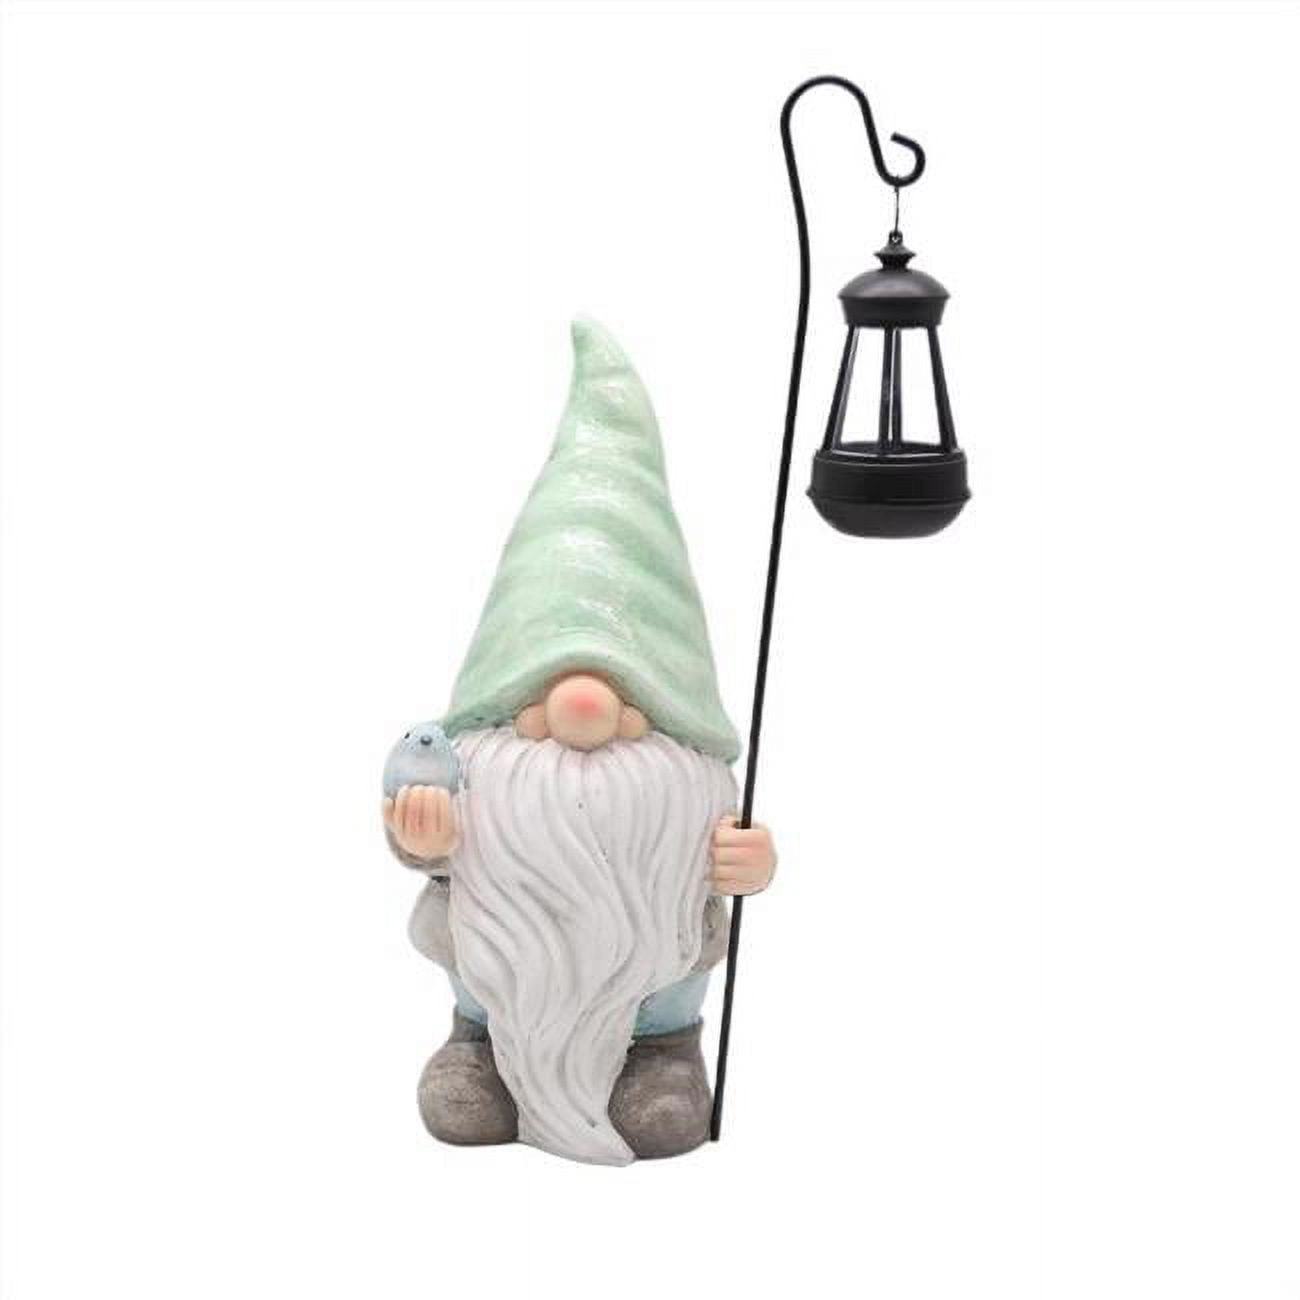 Picture of Infinity 8081731 16.14 in. Iron & Magnesia Gnome Figurine with Solar Lantern Outdoor Decoration - Multicolored - Pack of 4